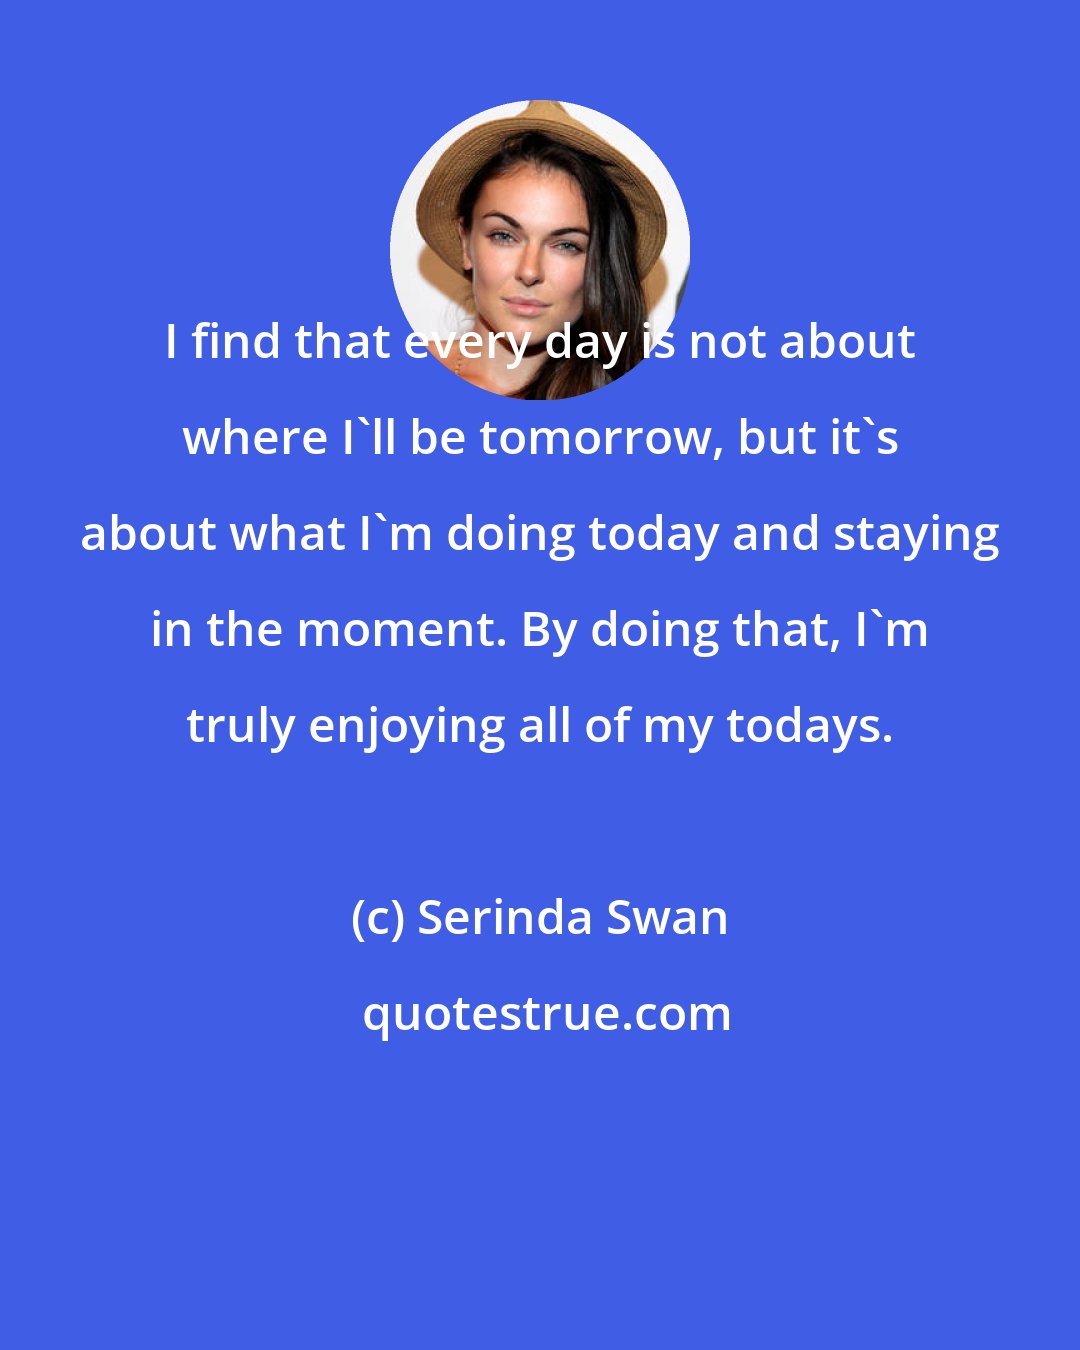 Serinda Swan: I find that every day is not about where I'll be tomorrow, but it's about what I'm doing today and staying in the moment. By doing that, I'm truly enjoying all of my todays.